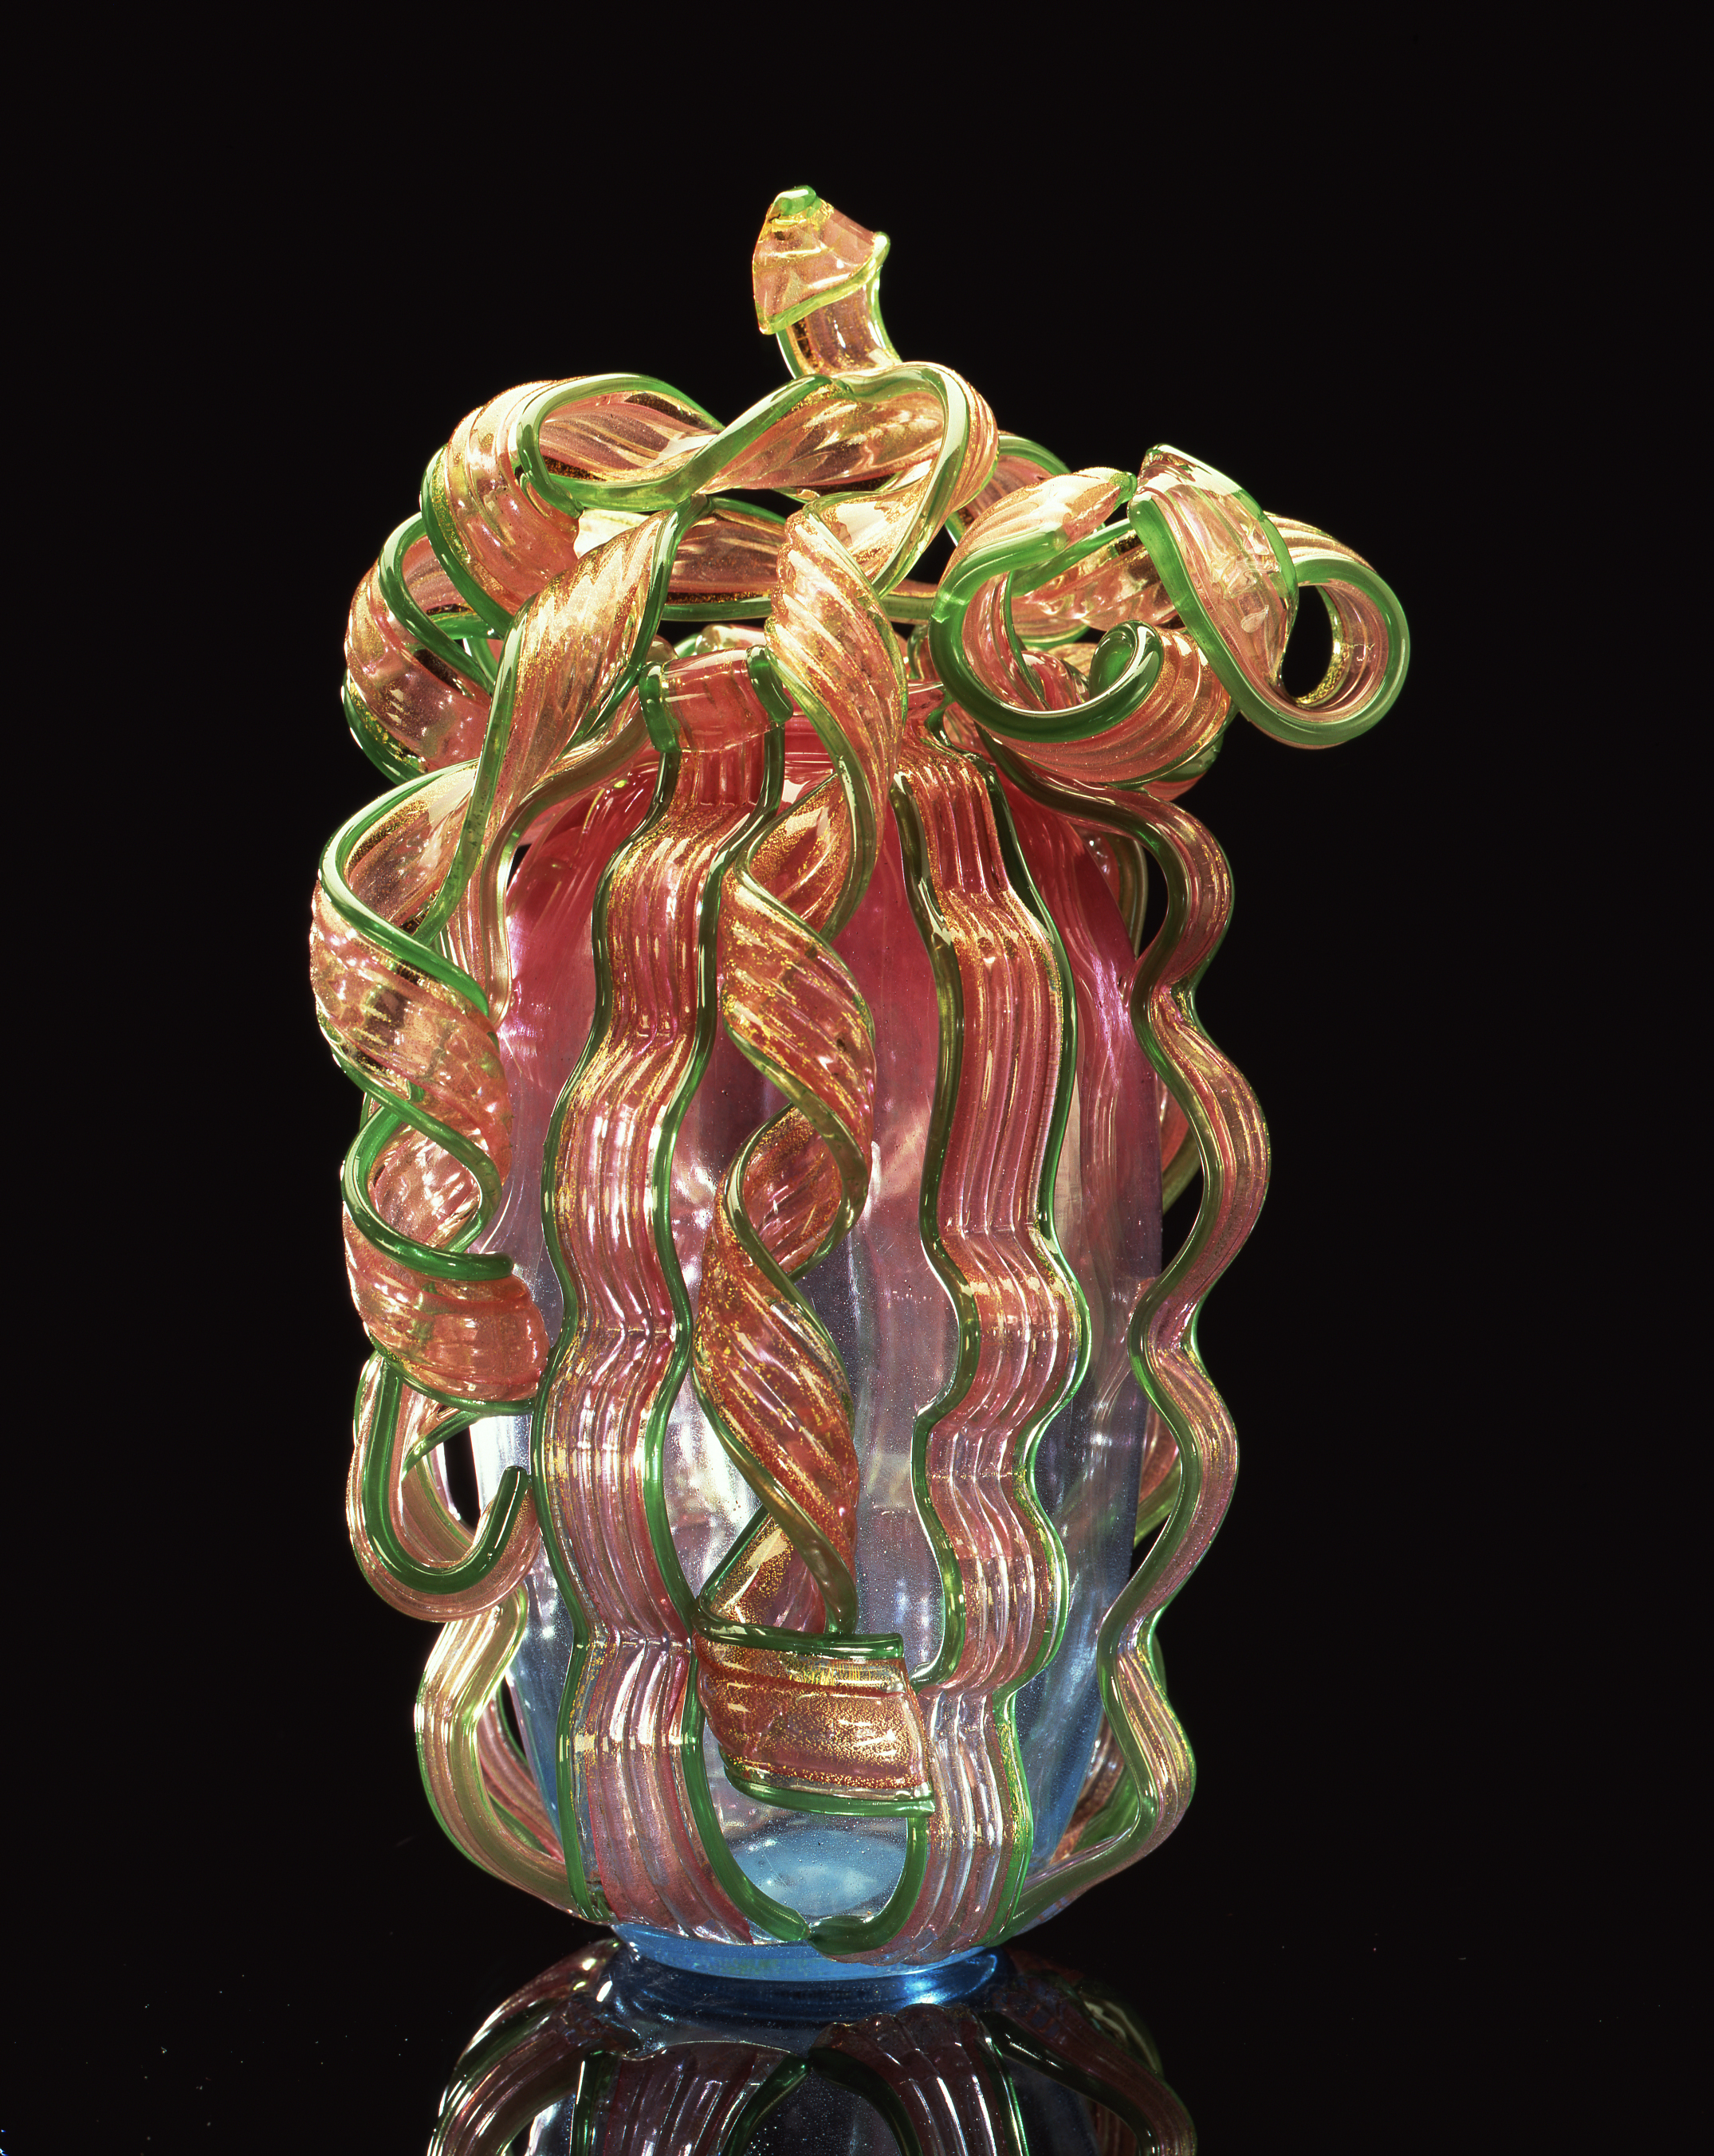  Dale Chihuly,&nbsp; Nymph Pink Piccolo Venetian with Pink and Green Ribbons &nbsp;(1994, glass, 11 x 7 x 7 inches) 